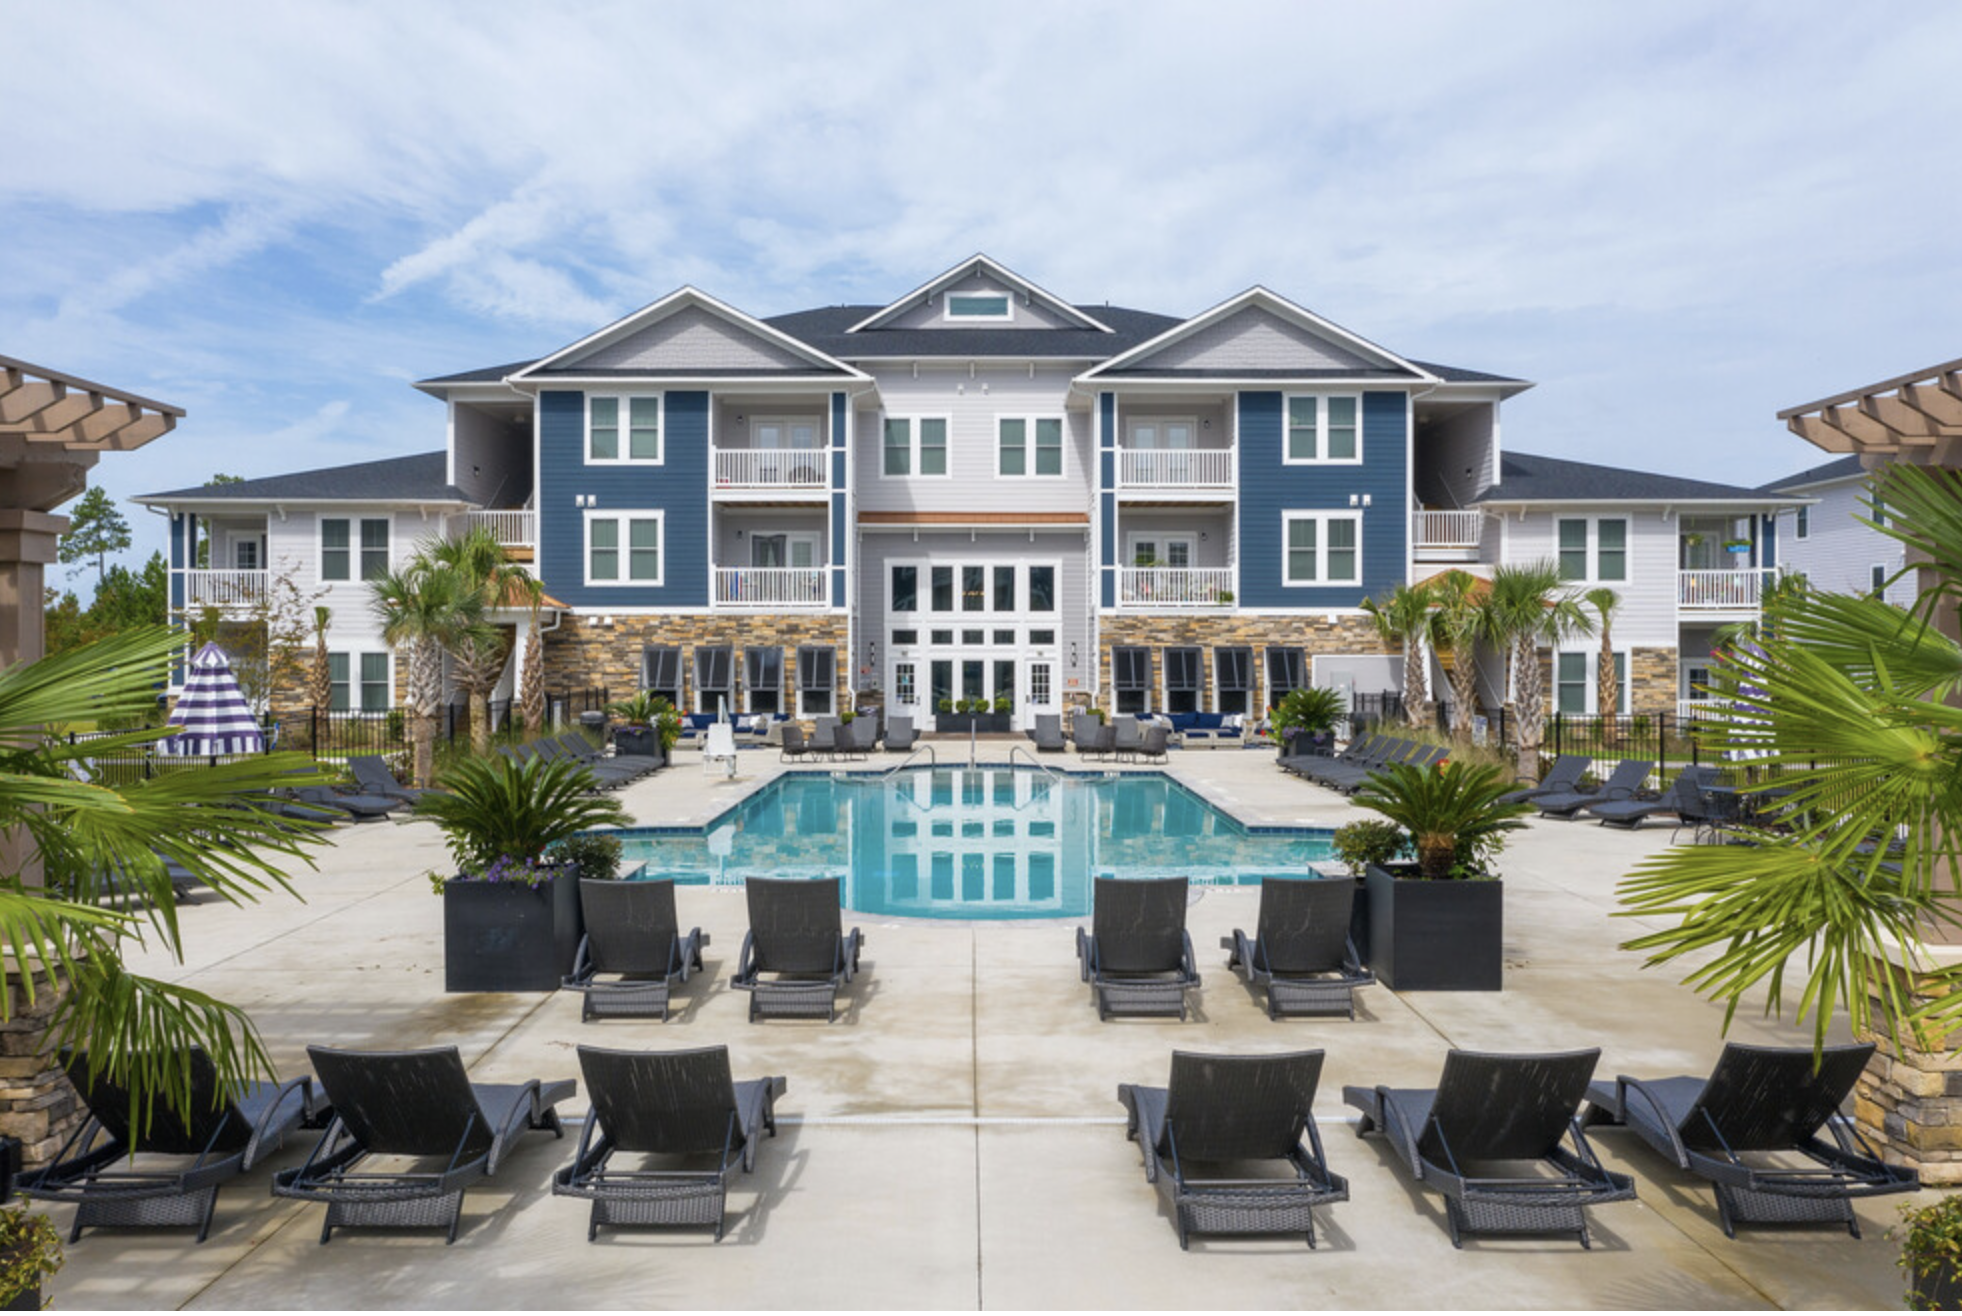 RK Properties Buys Multifamily Property in Myrtle Beach for DST Offering